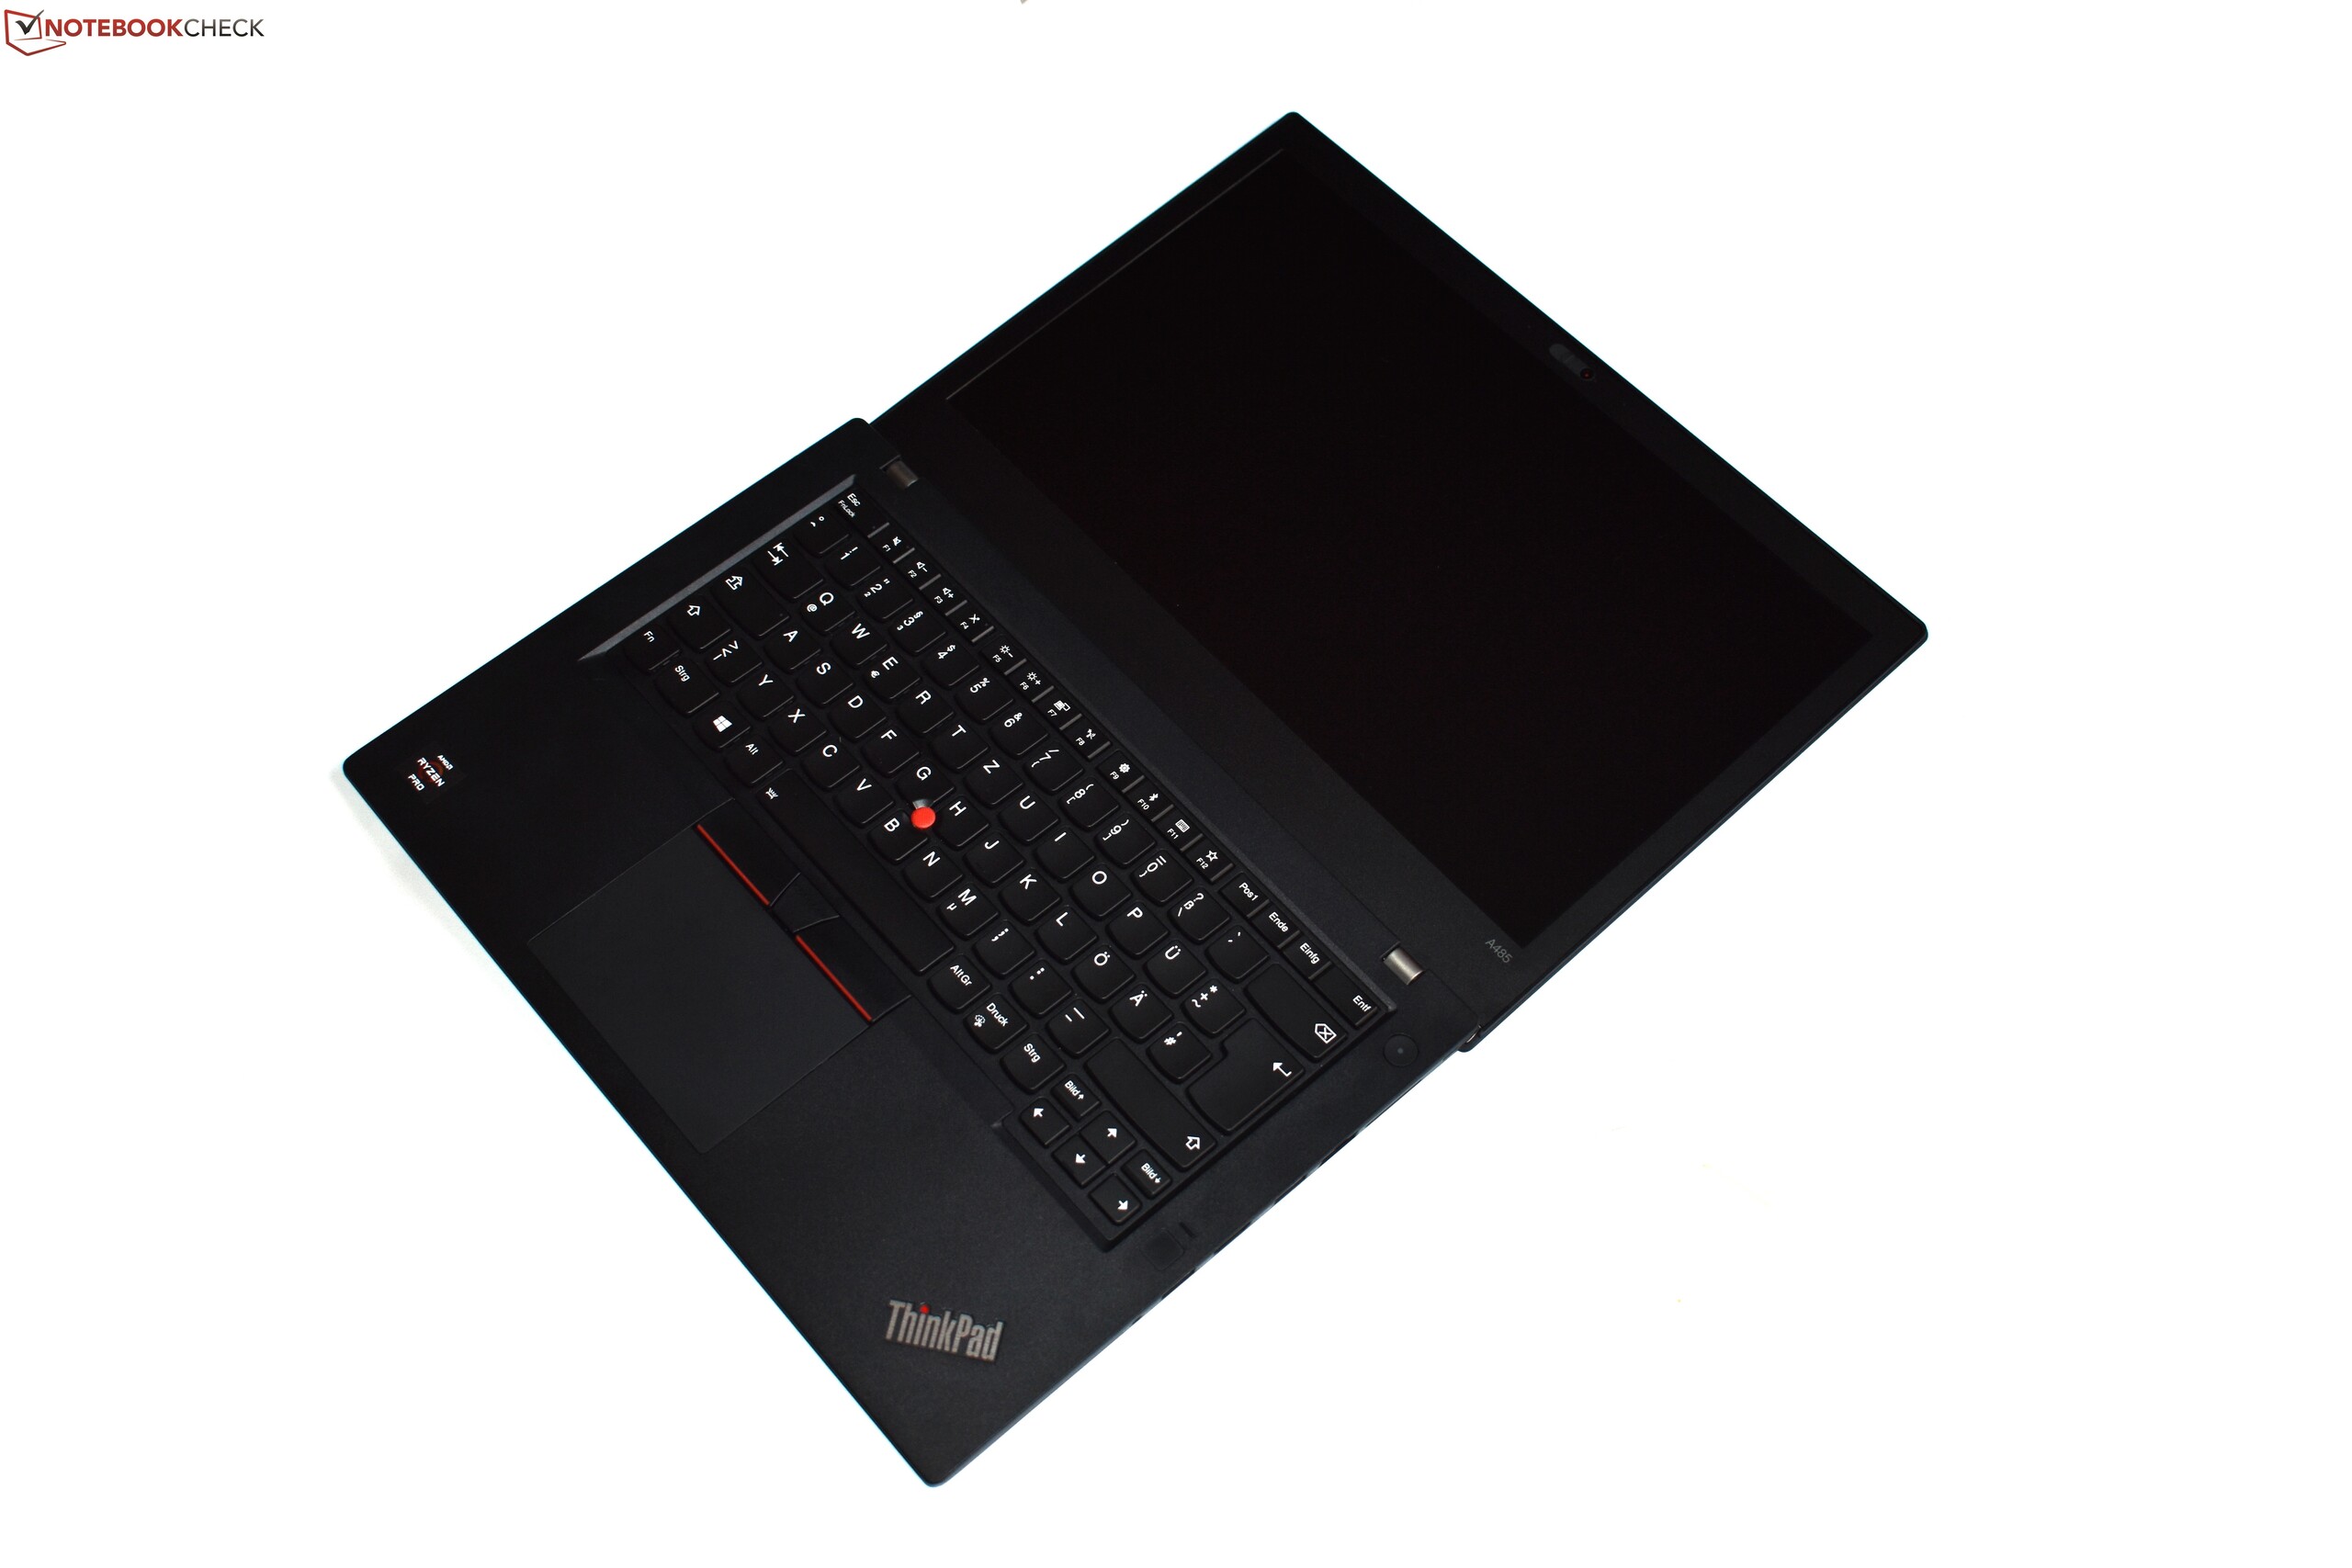 PC/タブレット ノートPC Lenovo ThinkPad A485 (Ryzen 5 Pro) Laptop Review - NotebookCheck 